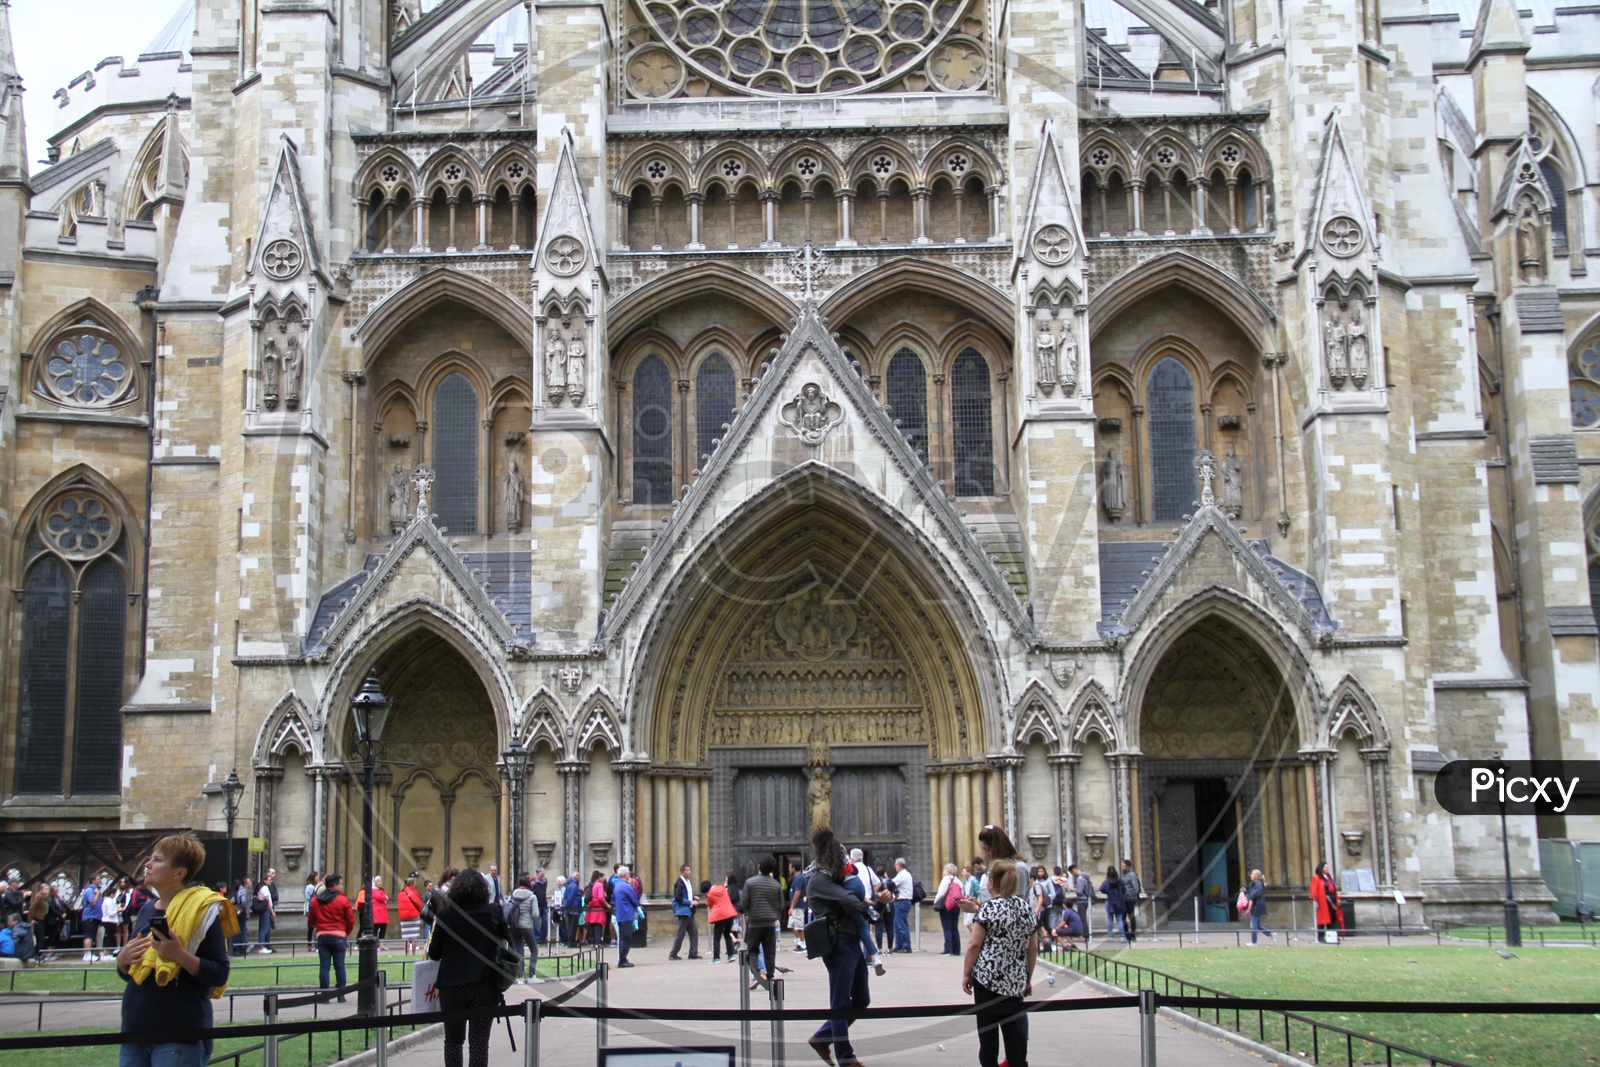 Tourists at Westminster Abbey Cathedral